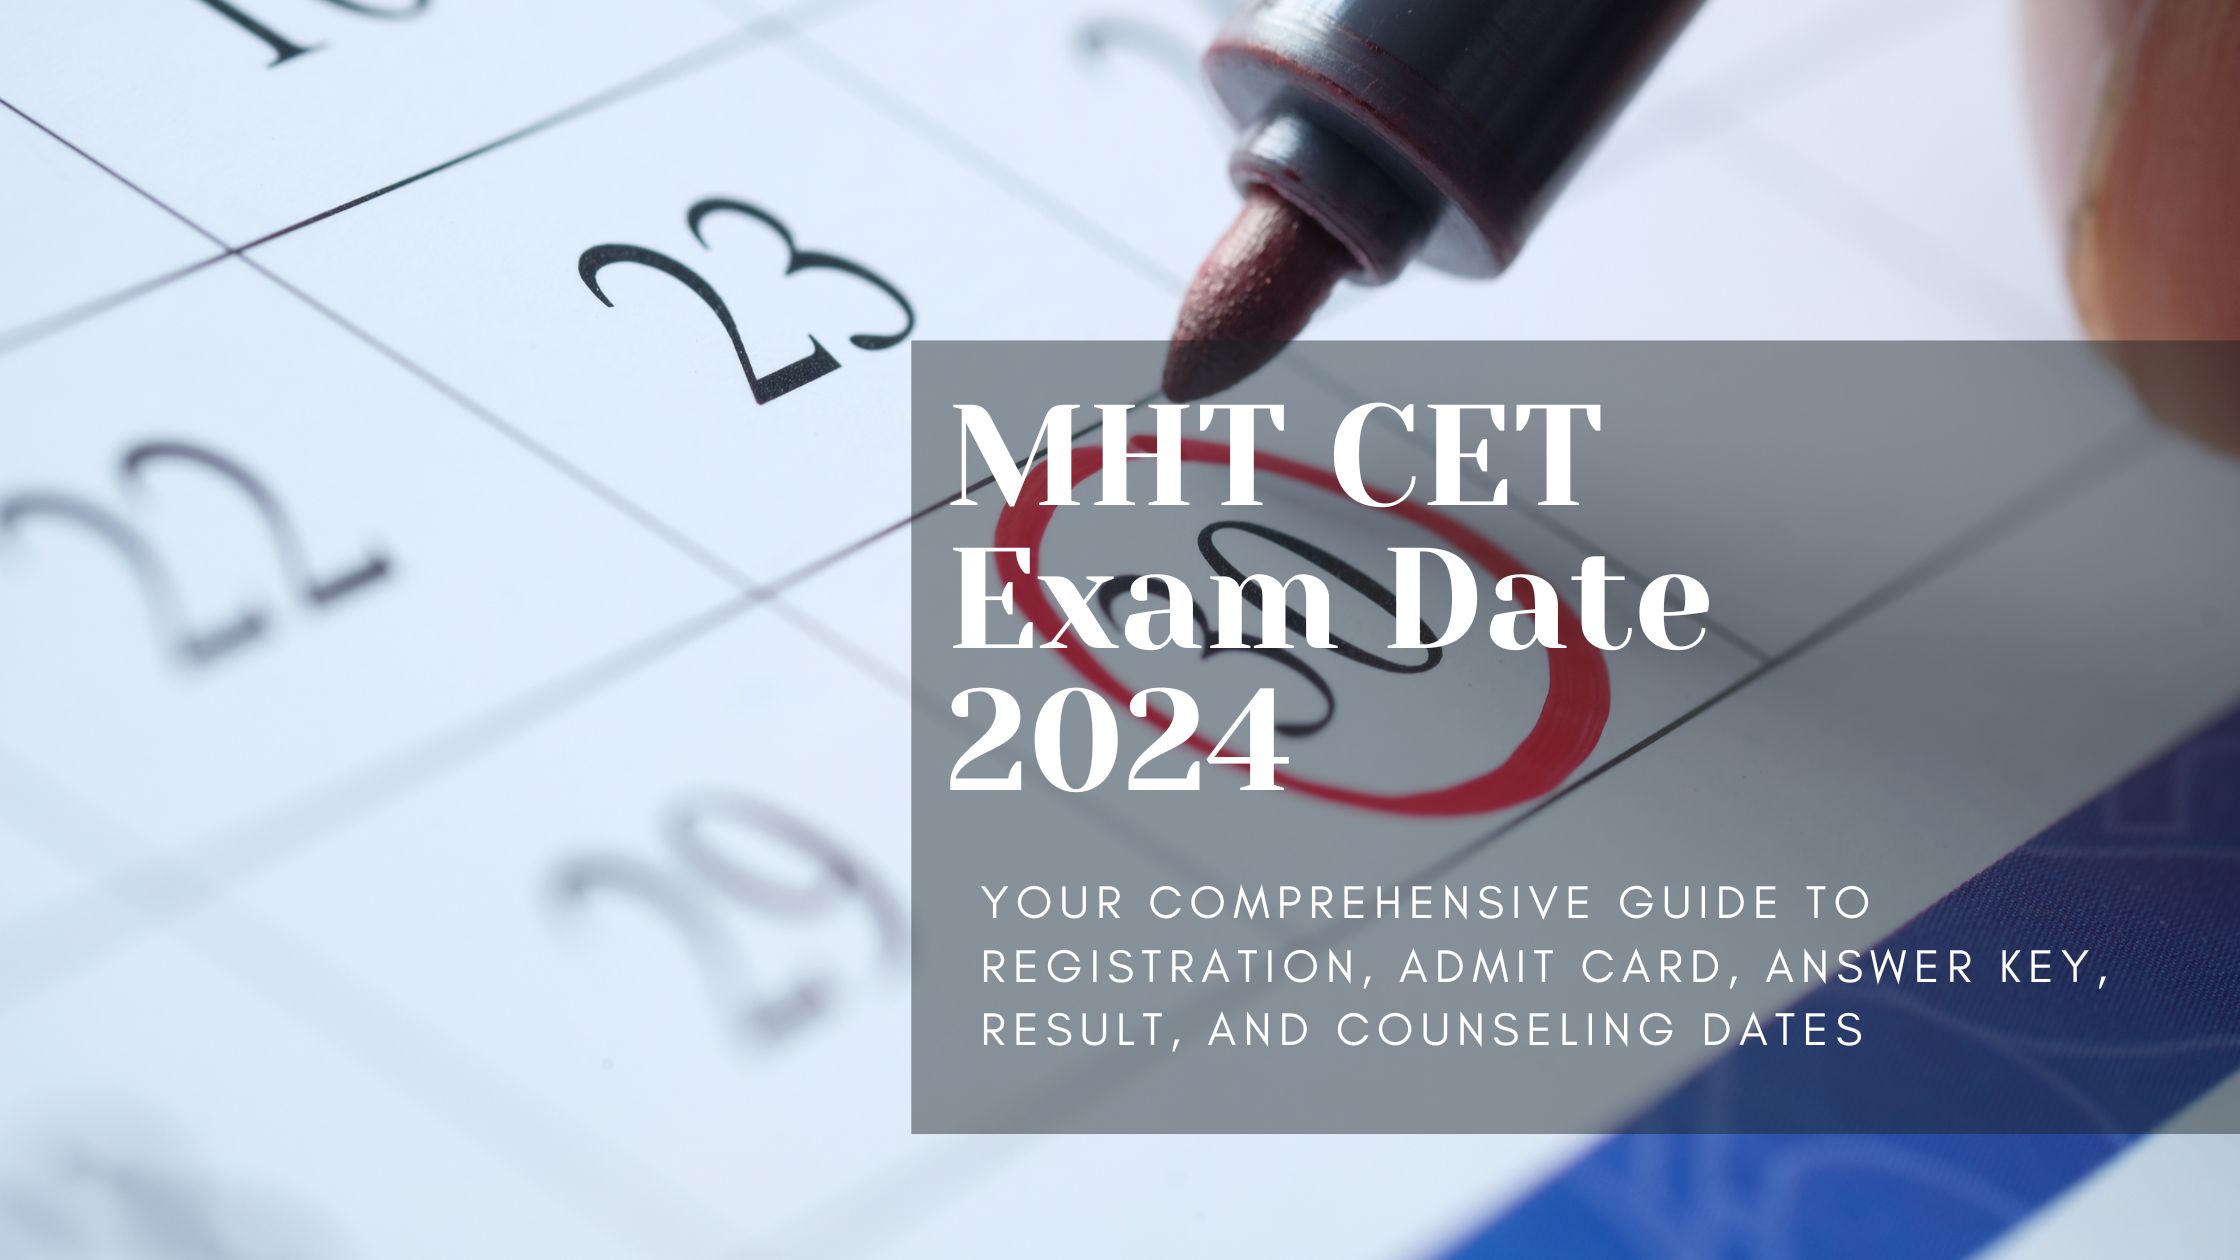 MHT CET Exam Date 2024: Your Comprehensive Guide to Registration, Admit Card, Answer Key, Result, and Counseling Dates